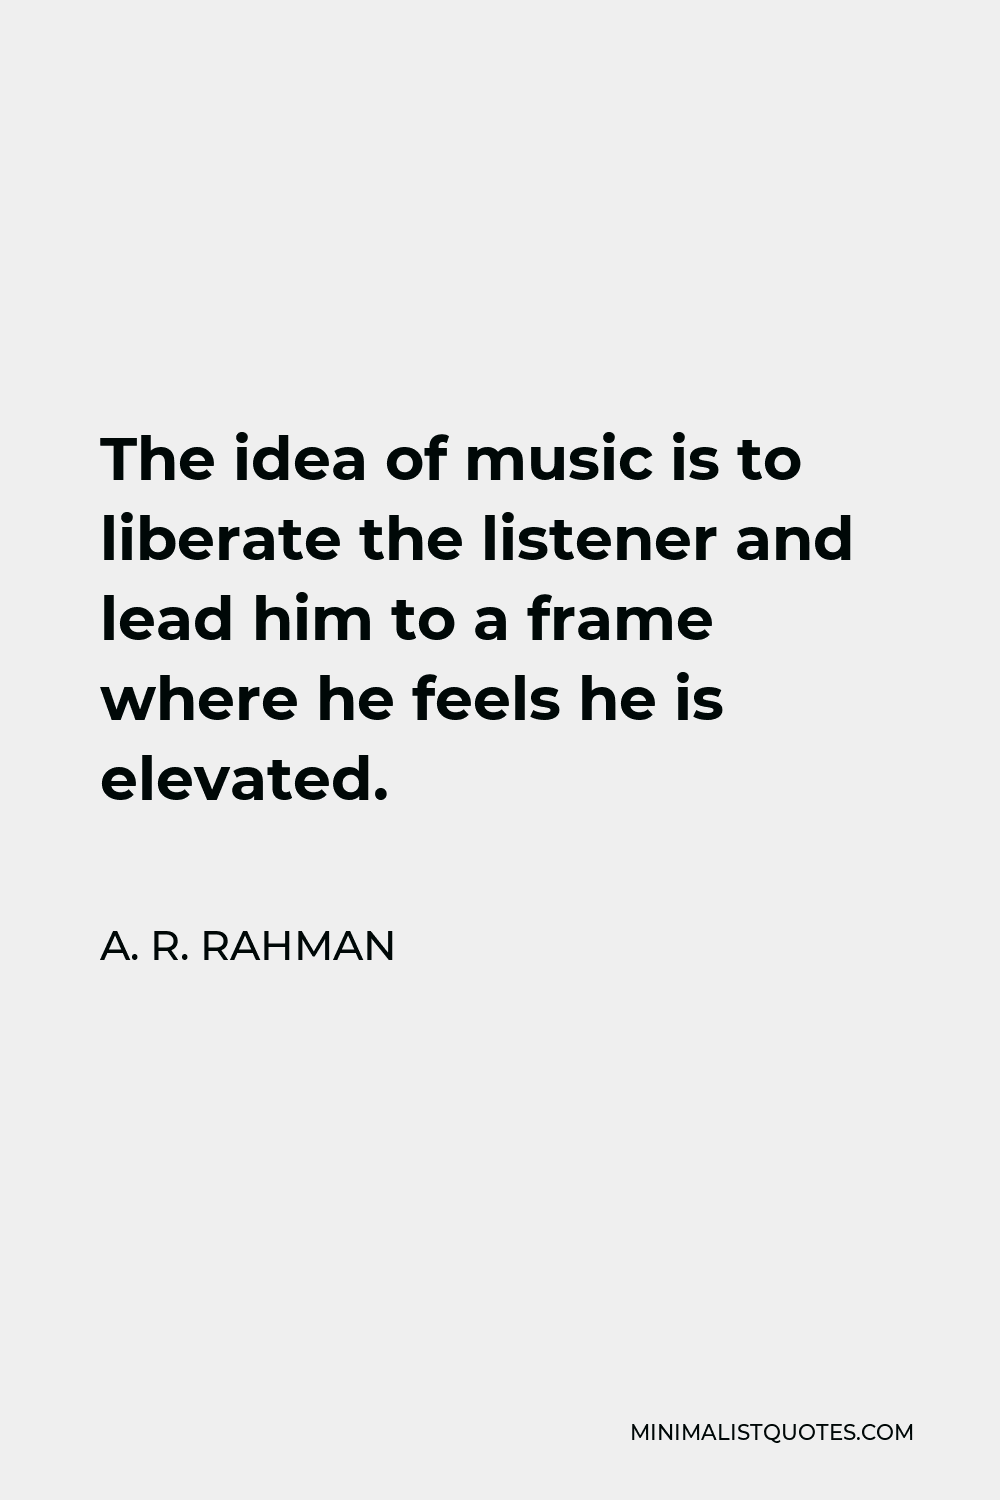 A. R. Rahman Quote - The idea of music is to liberate the listener and lead him to a frame where he feels he is elevated.